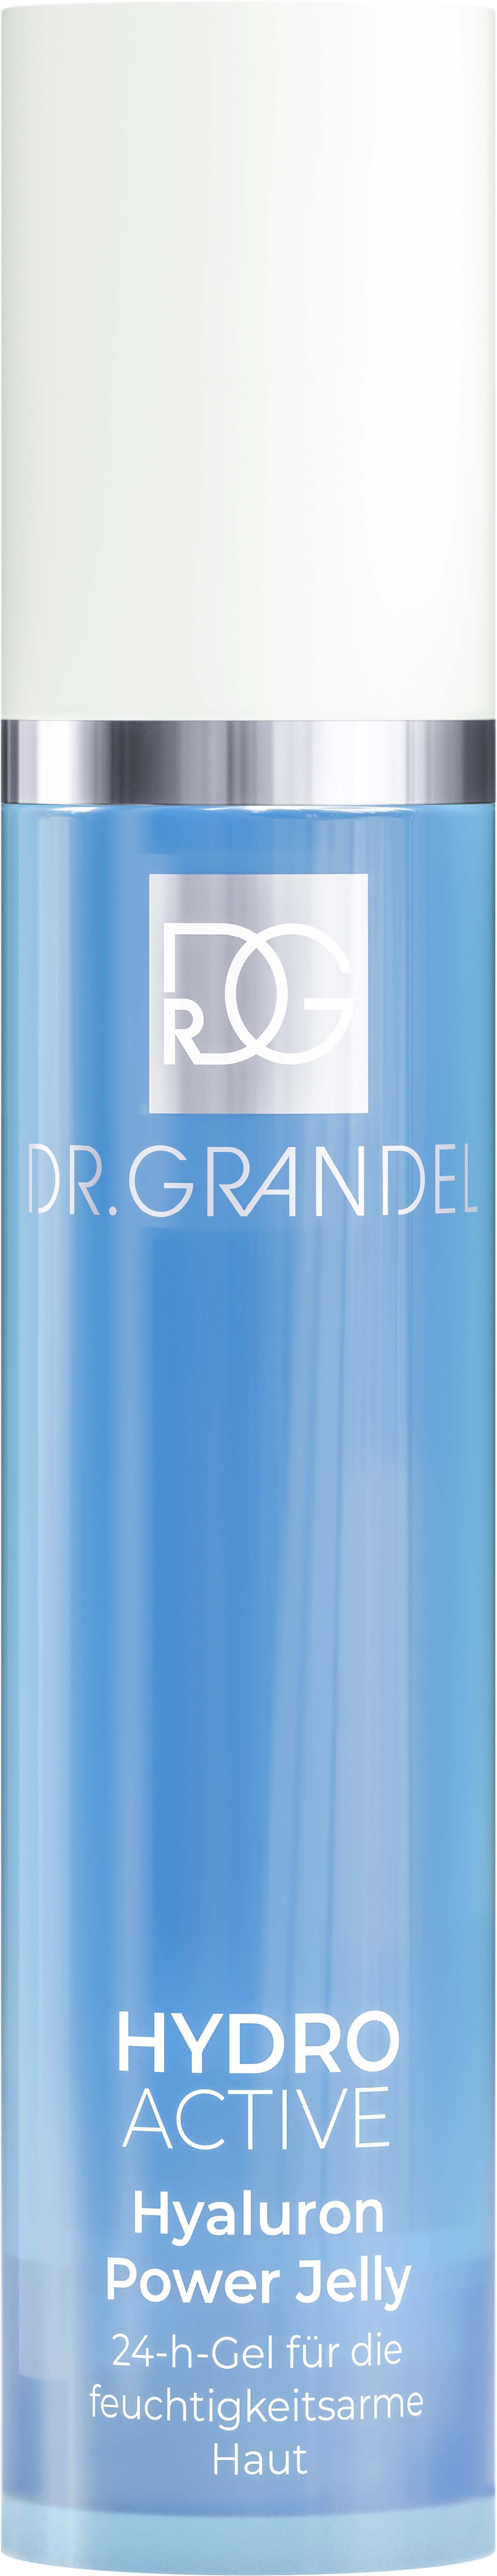 Dr. Grandel Hydro Active Hyaluron Power Jelly 50 ml